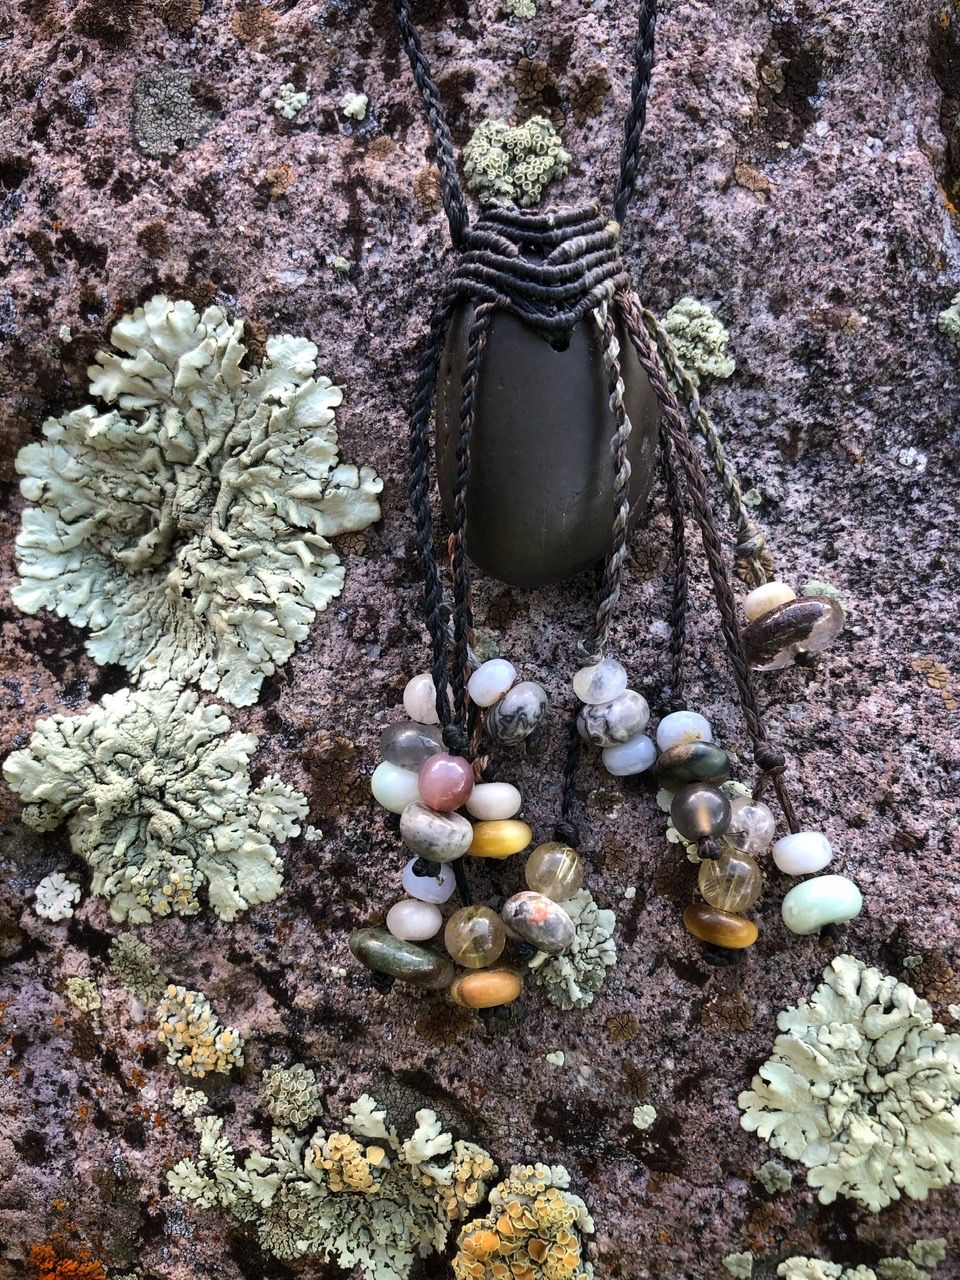 A smooth black ocean tumbled stone talisman necklace with braided dangling beads, rests on a lichen covered Boulder